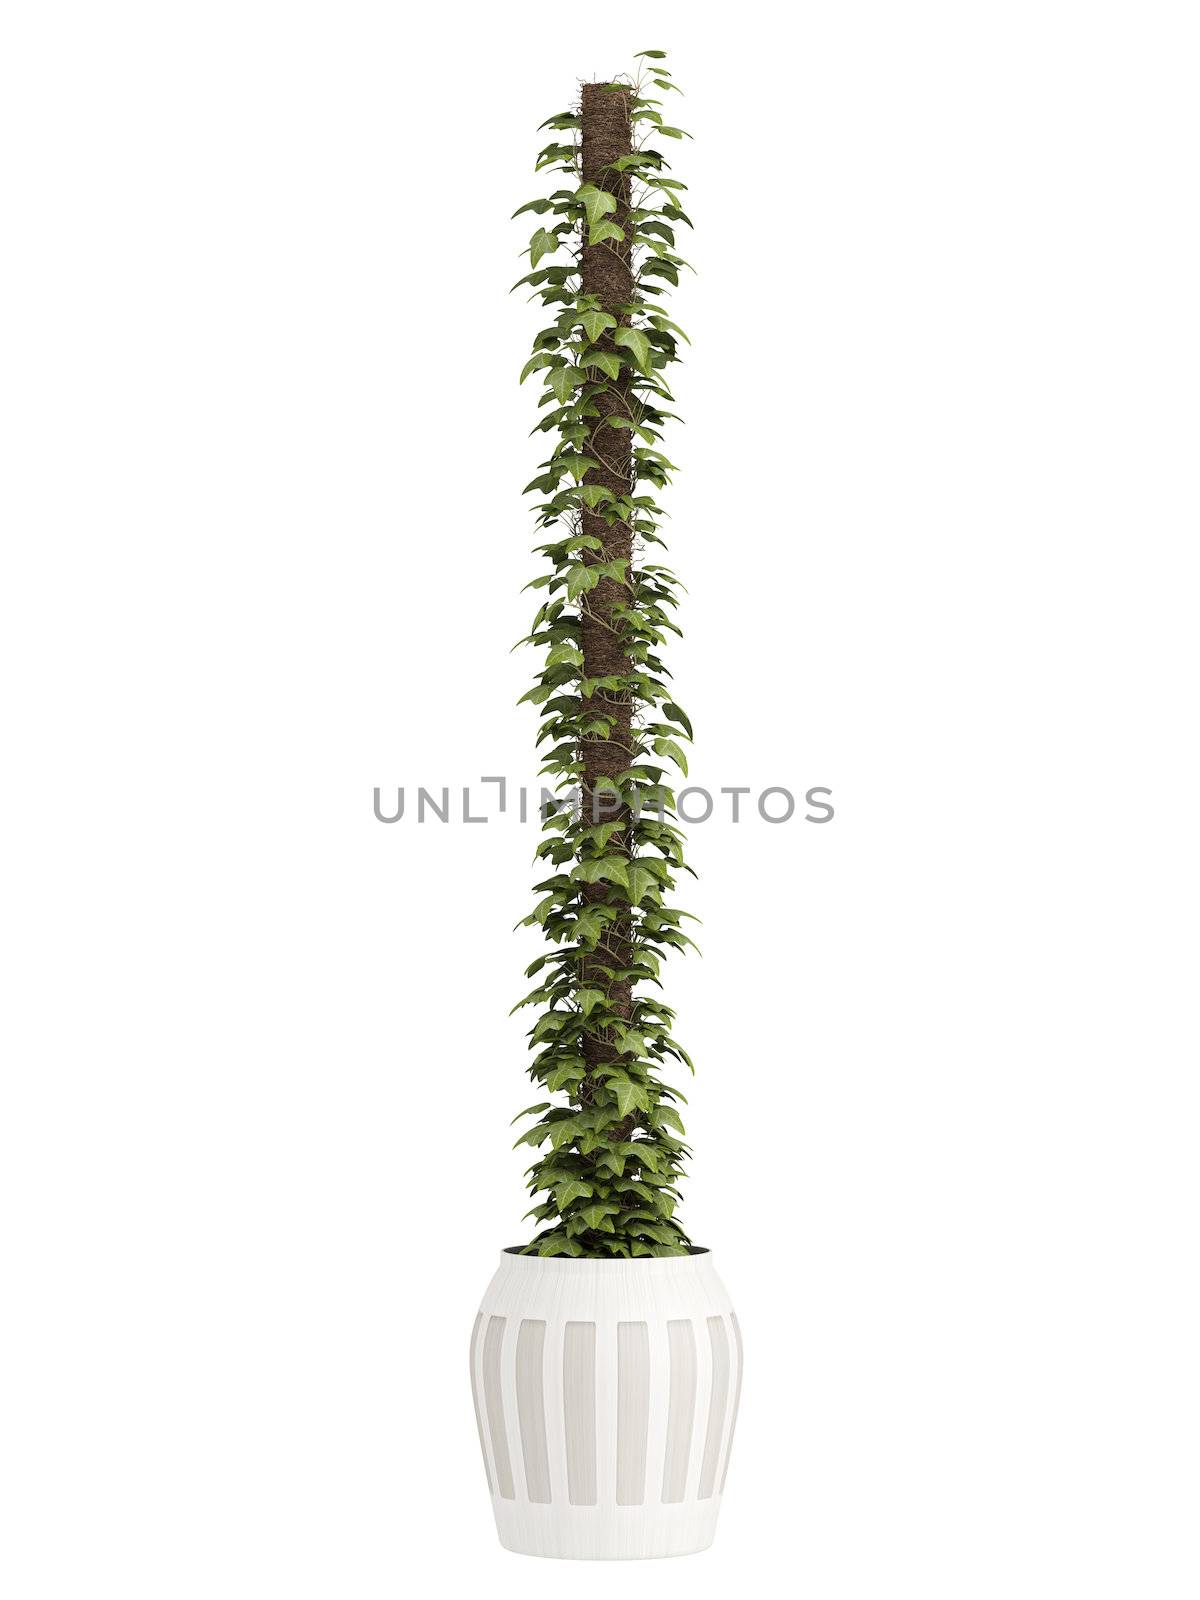 Ivy creeper grown as a houseplant covering a support in a ceramic container isolated on white